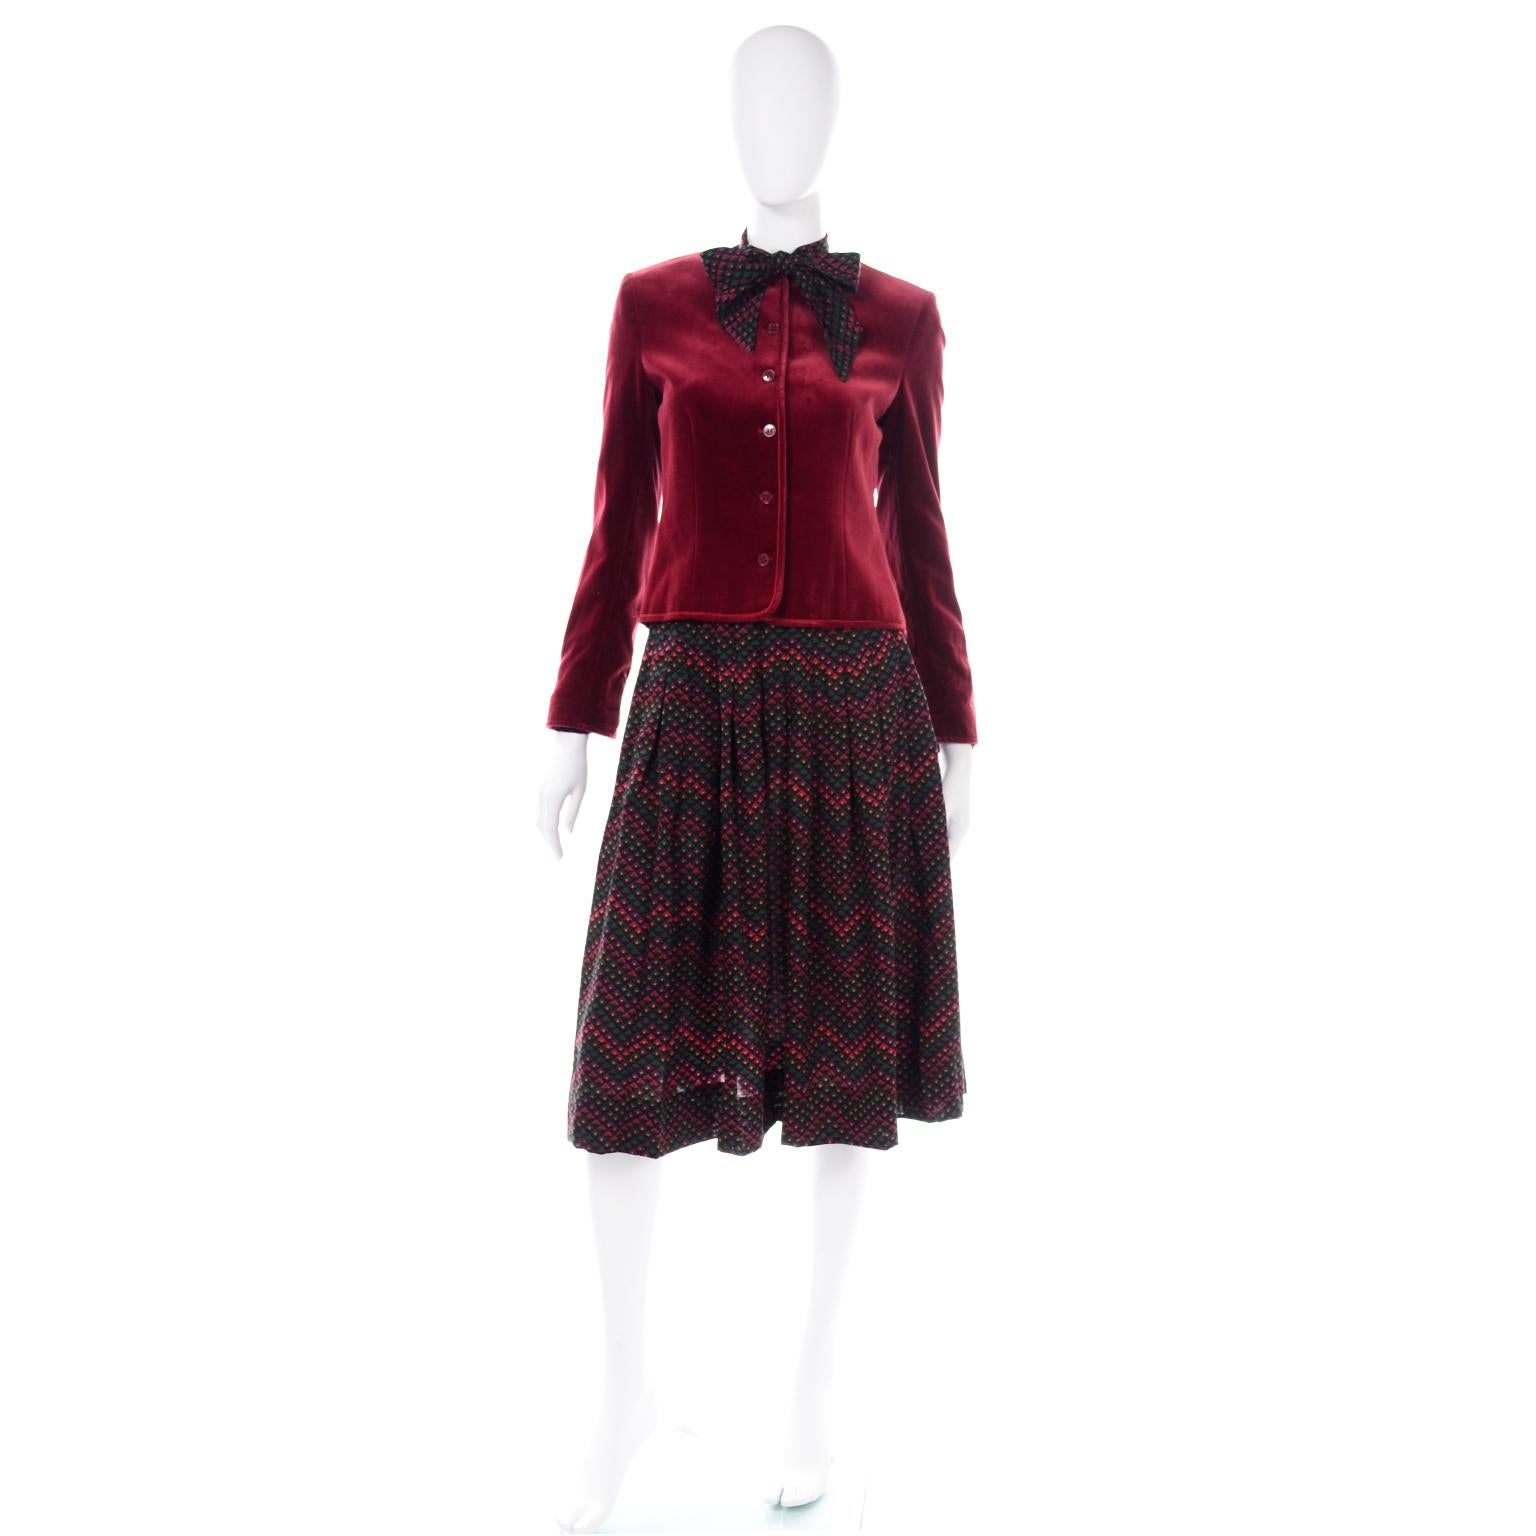 This is a beautifully made Jaeger 3 piece outfit in rich Autumnal/Winter hues. We love the deep red velvet jacket and the gorgeous print of the blouse and skirt. 
The fully lined  jacket has buttons down the center front opening and a collarless